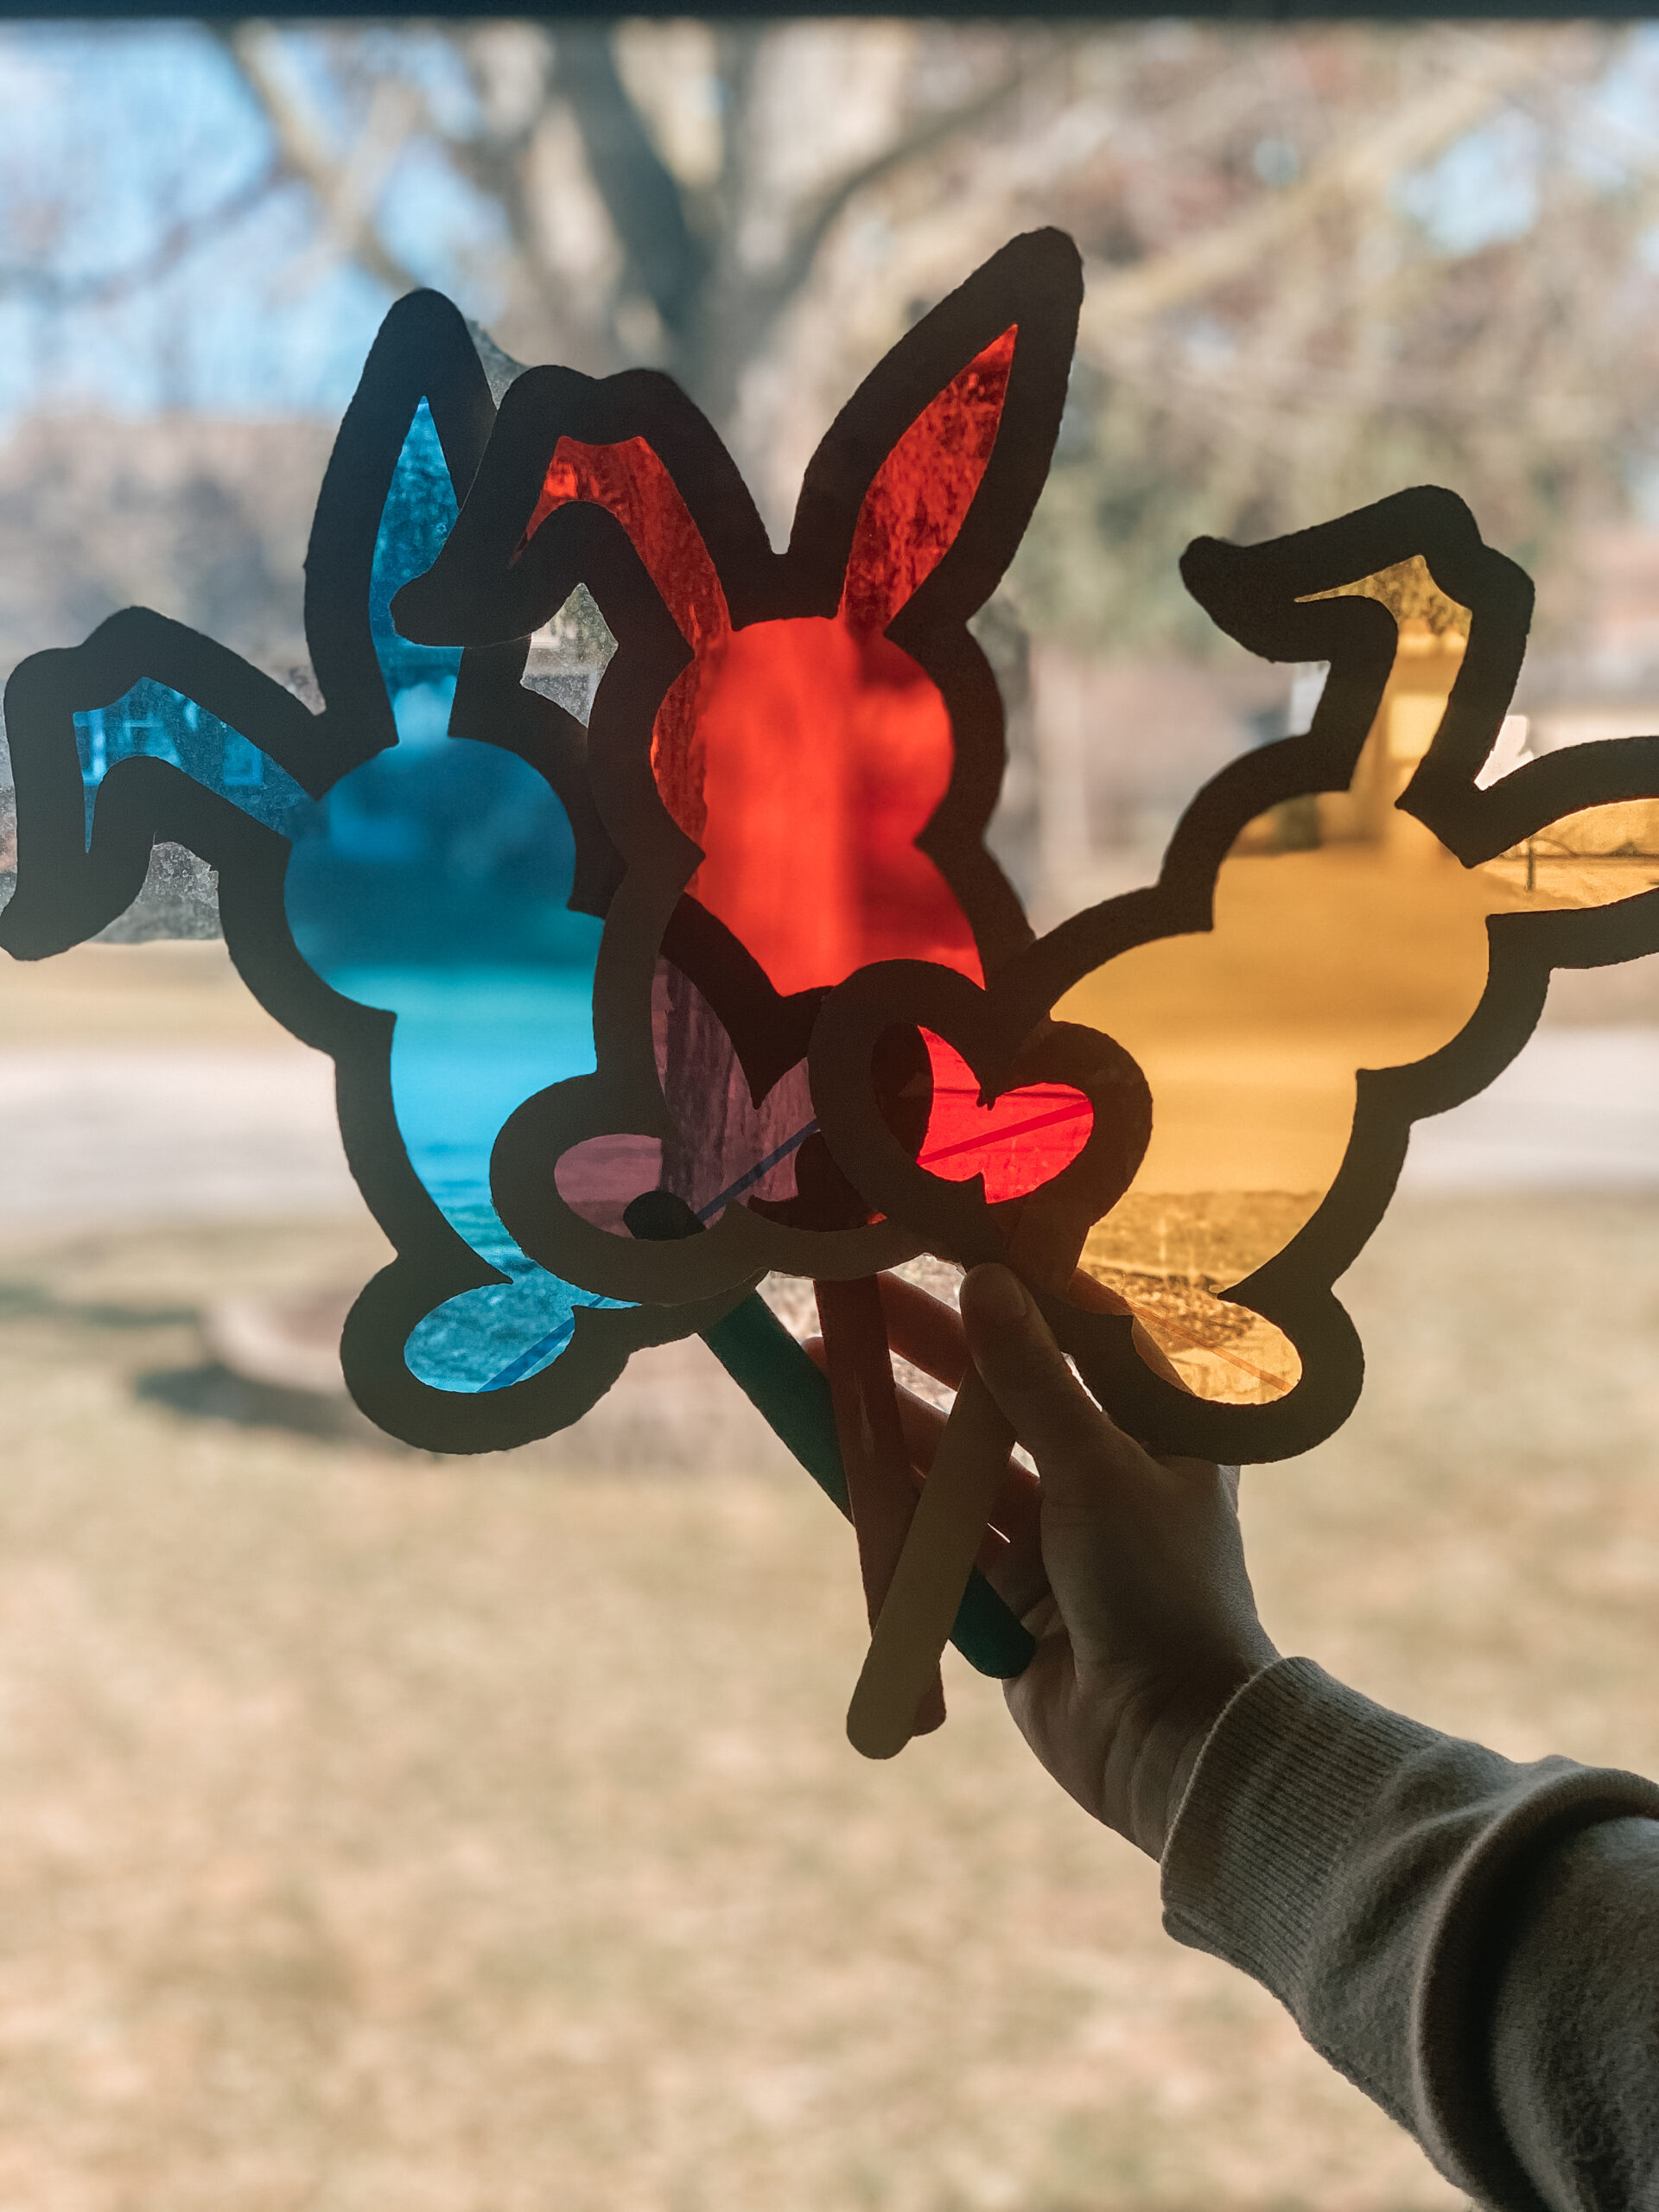 Kids Easter bunny suncatcher craft activity for learning primary and secondary color combinations. Made of repurposed cardboard and cellophane sheets